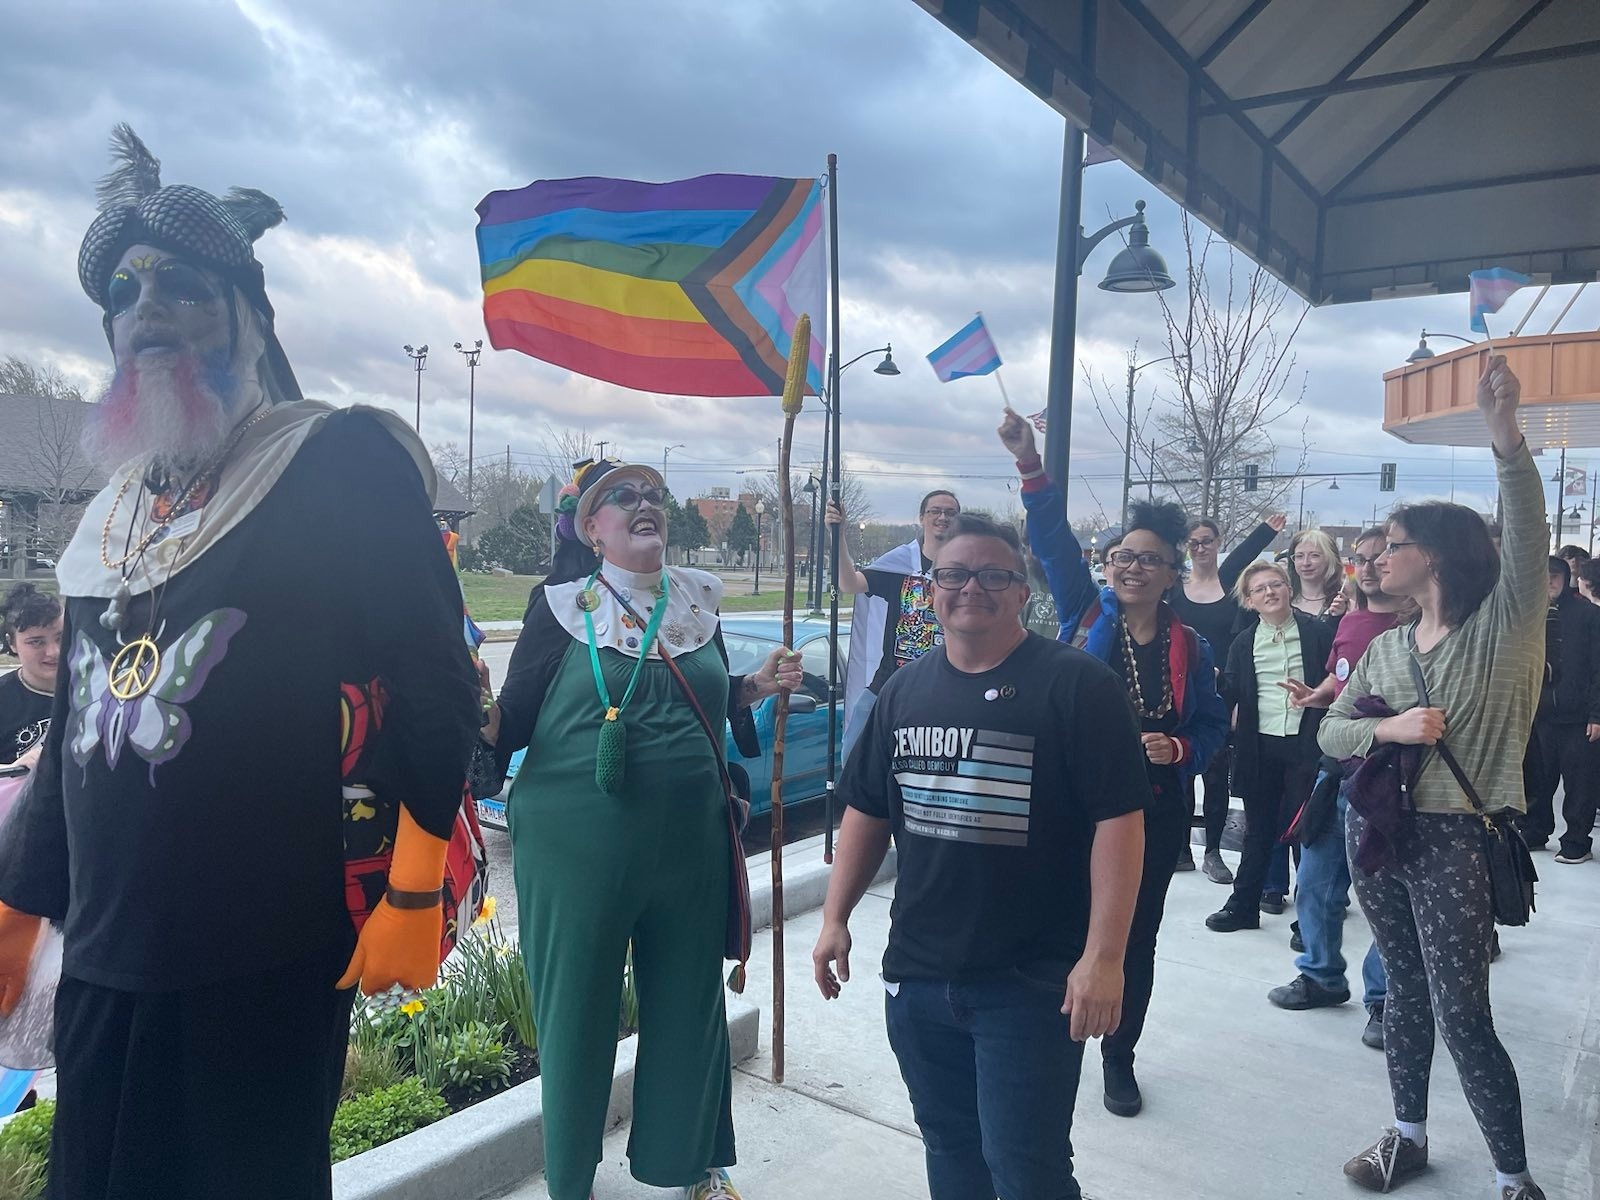 The image depicts a group of individuals smiling, holding gay and trans pride flags, and walking along a sidewalk in a parade on Trans Day of Visibility.